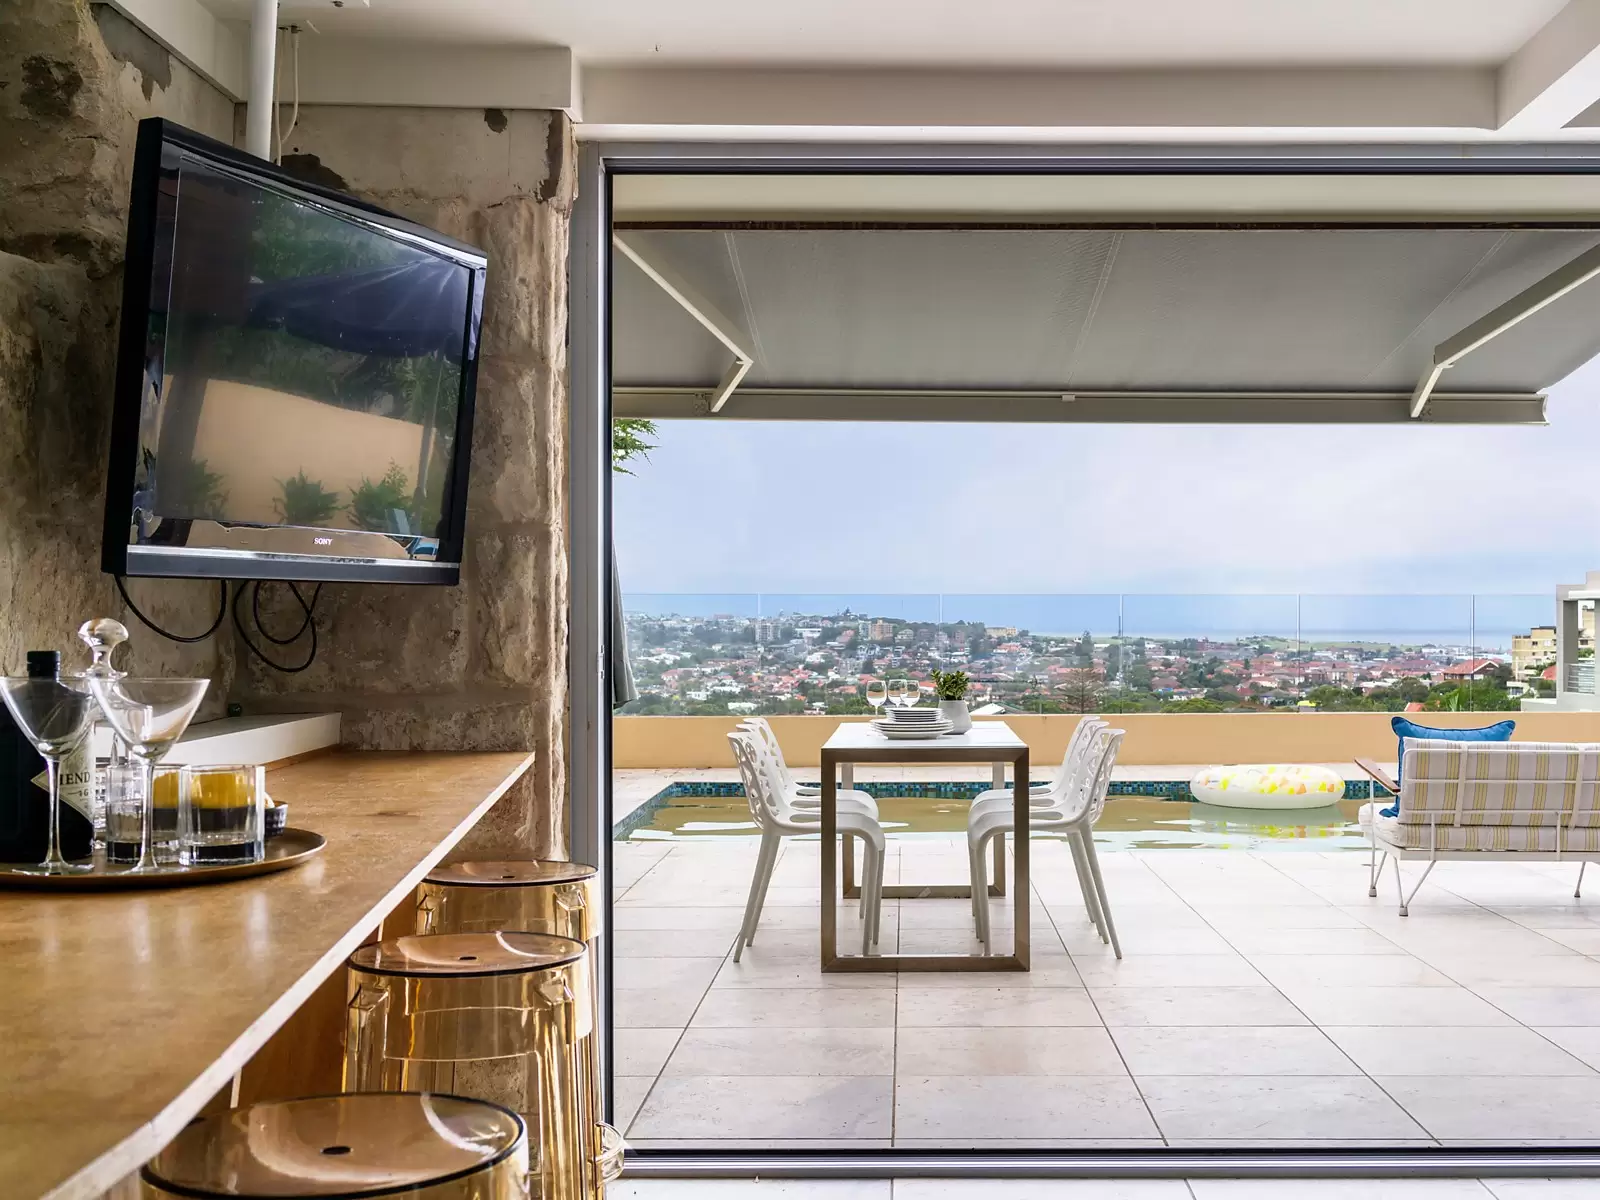 Photo #3: 145 Victoria Road, Bellevue Hill - Sold by Sydney Sotheby's International Realty